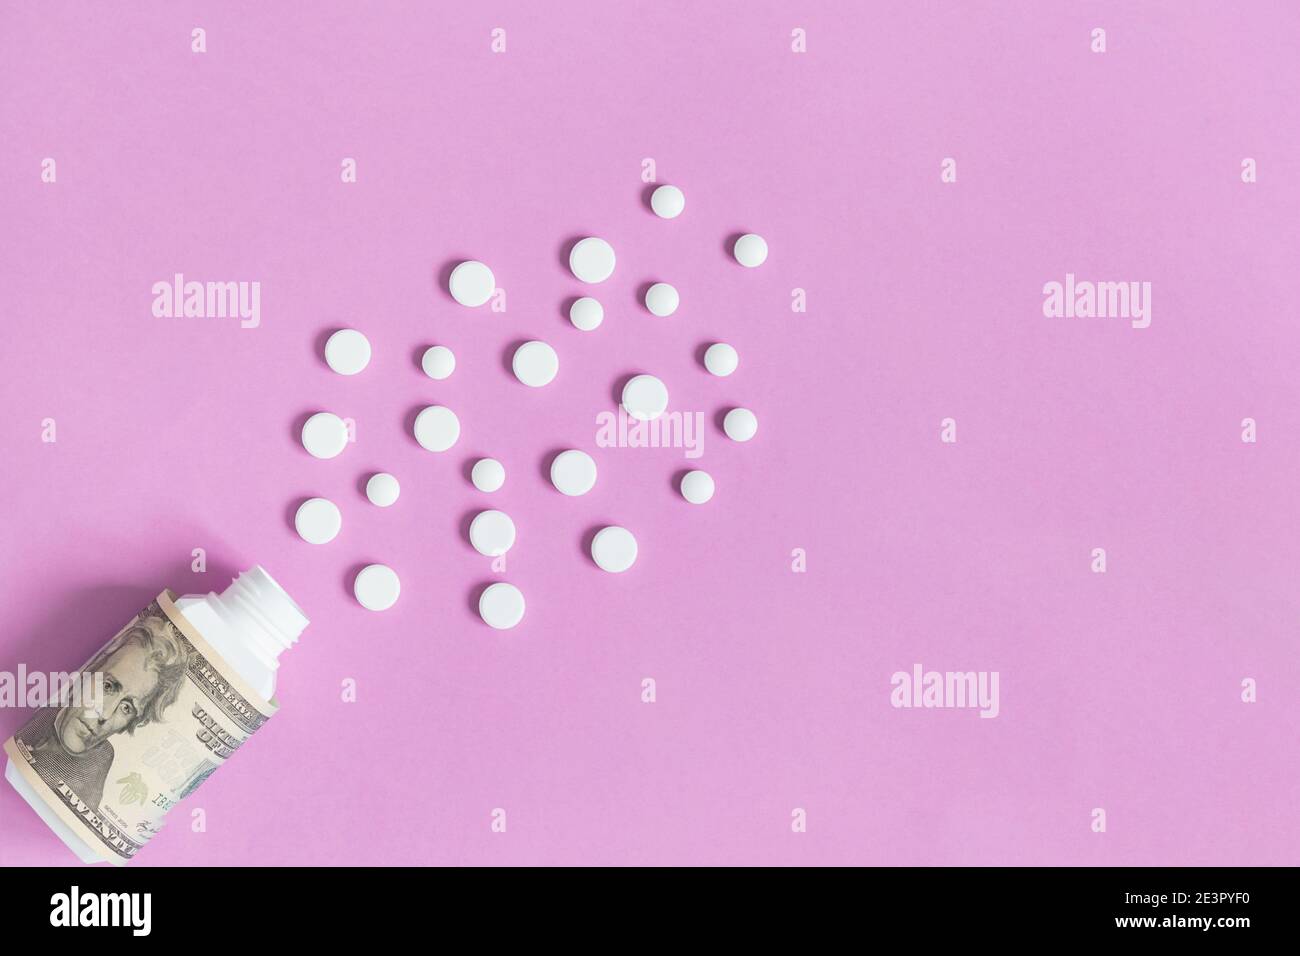 Medical bottle with dollars and various white pills. The concept of insurance medicine, high cost of drugs. Isolated on a pink background. Stock Photo